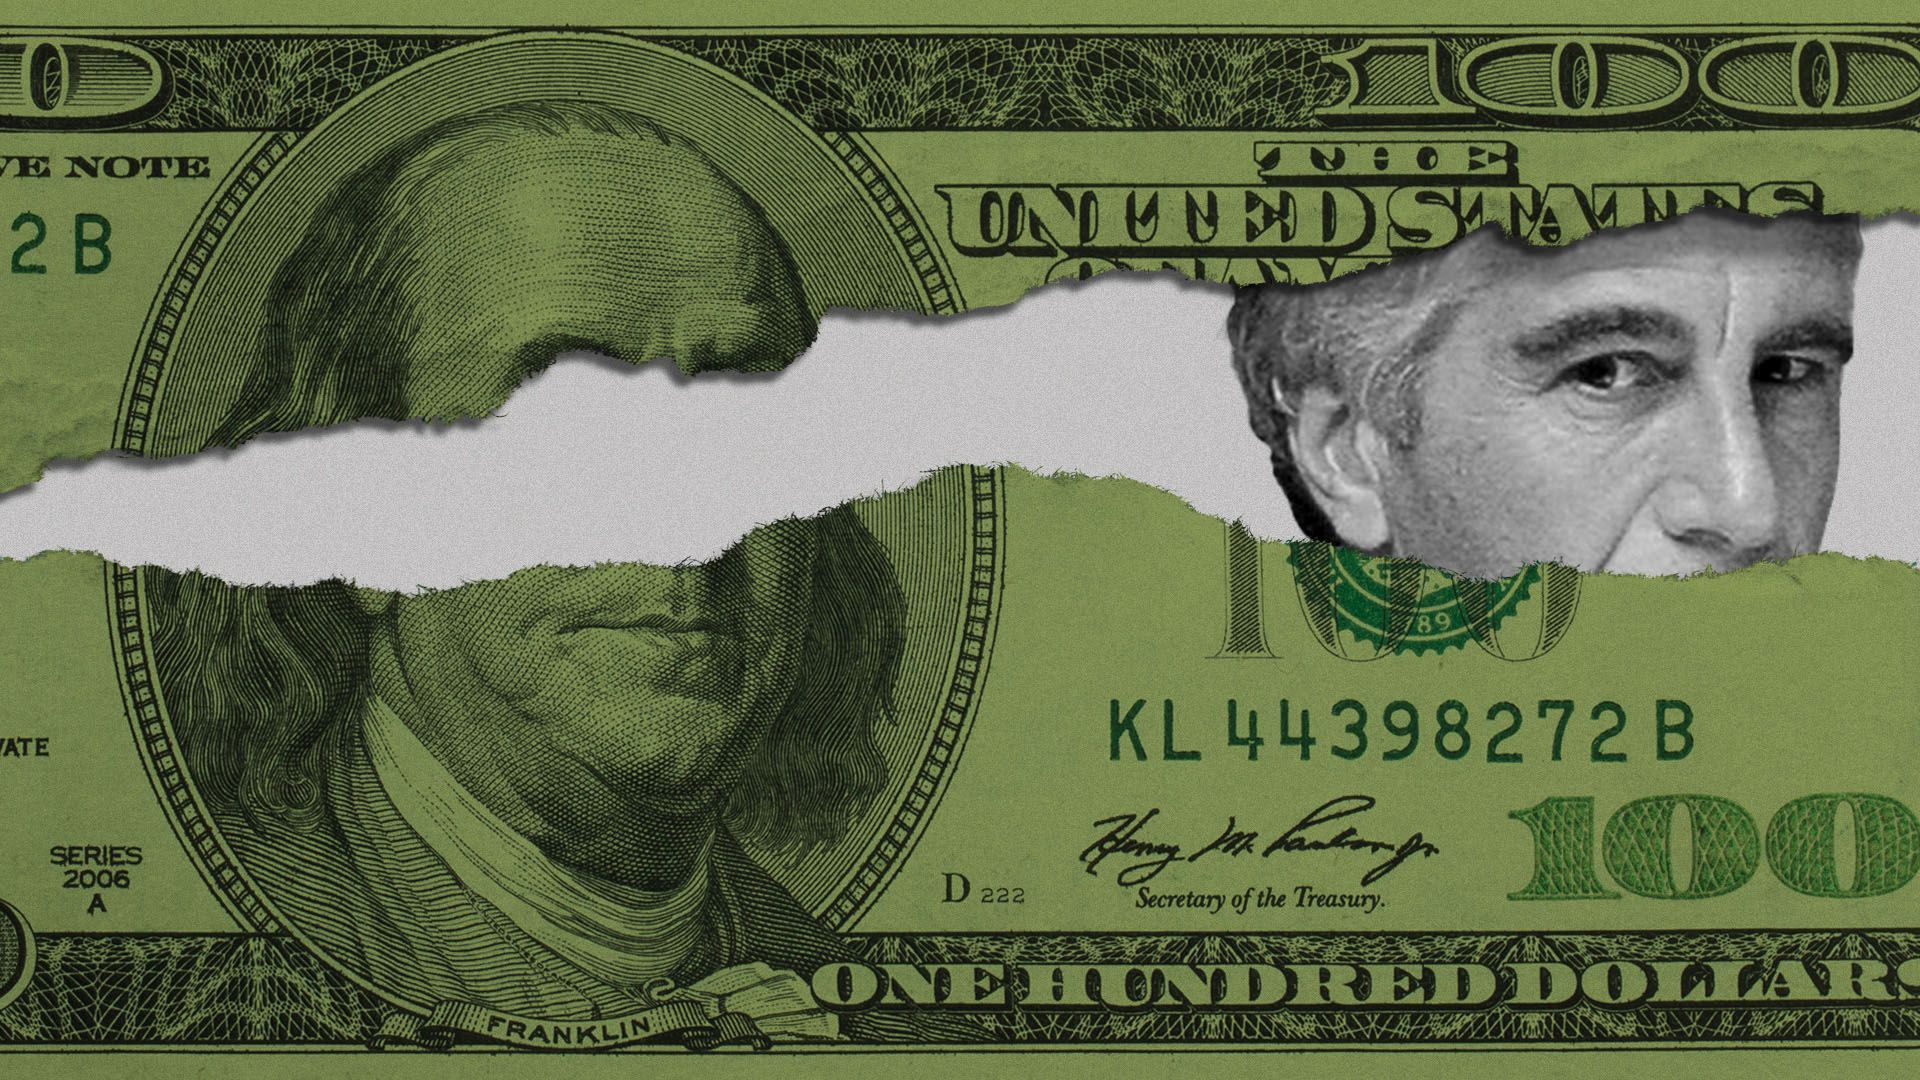 Illustration of a torn $100 bill with Jeffrey Epstein peaking through the tear.